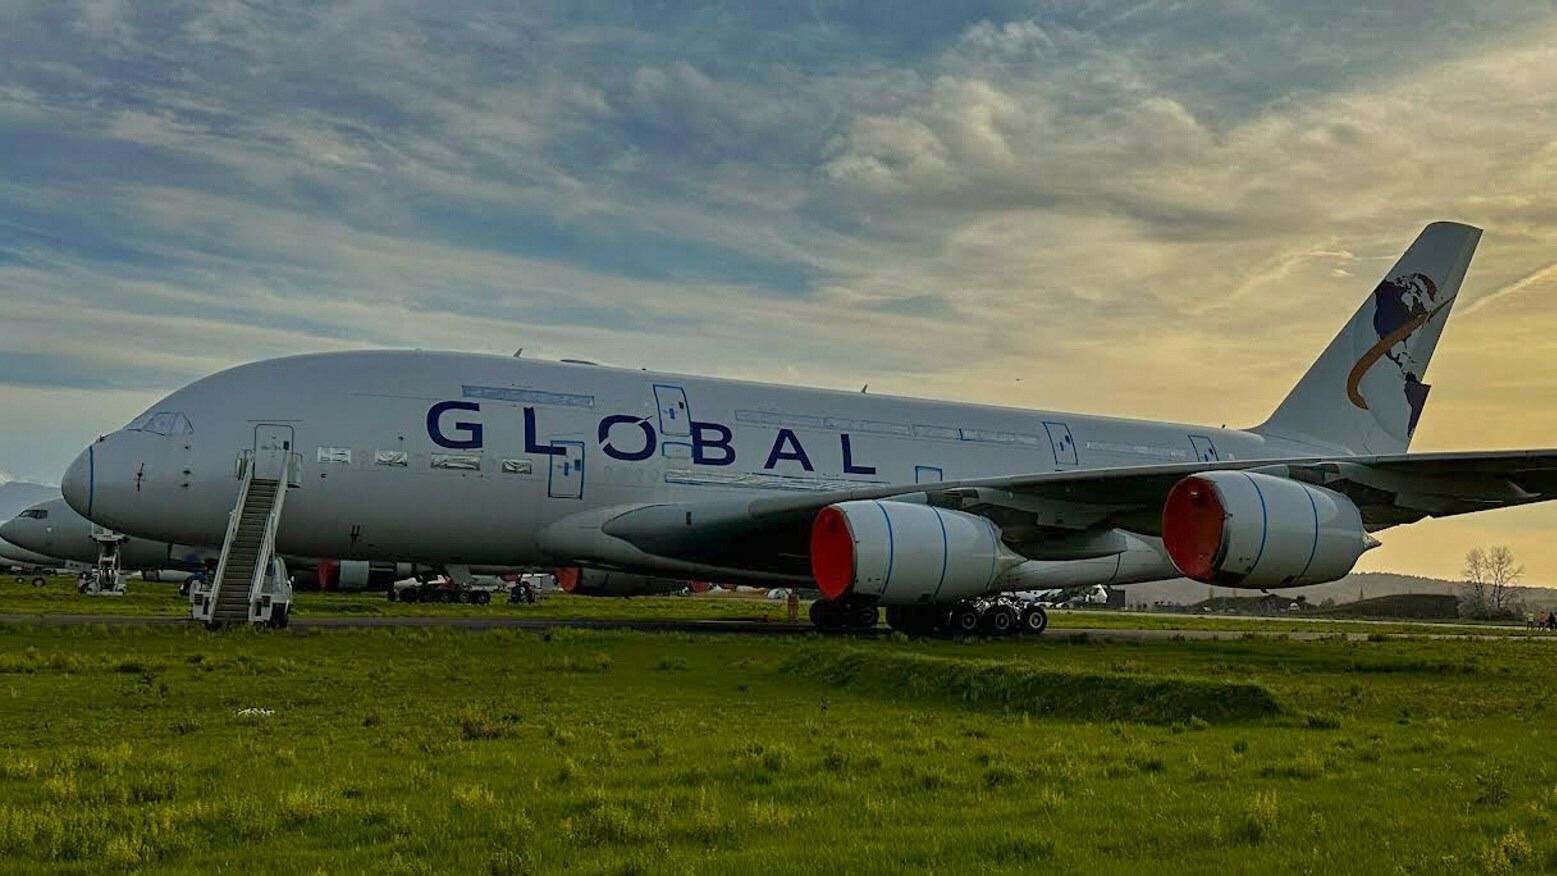 Global_Airlines A380 at sunset